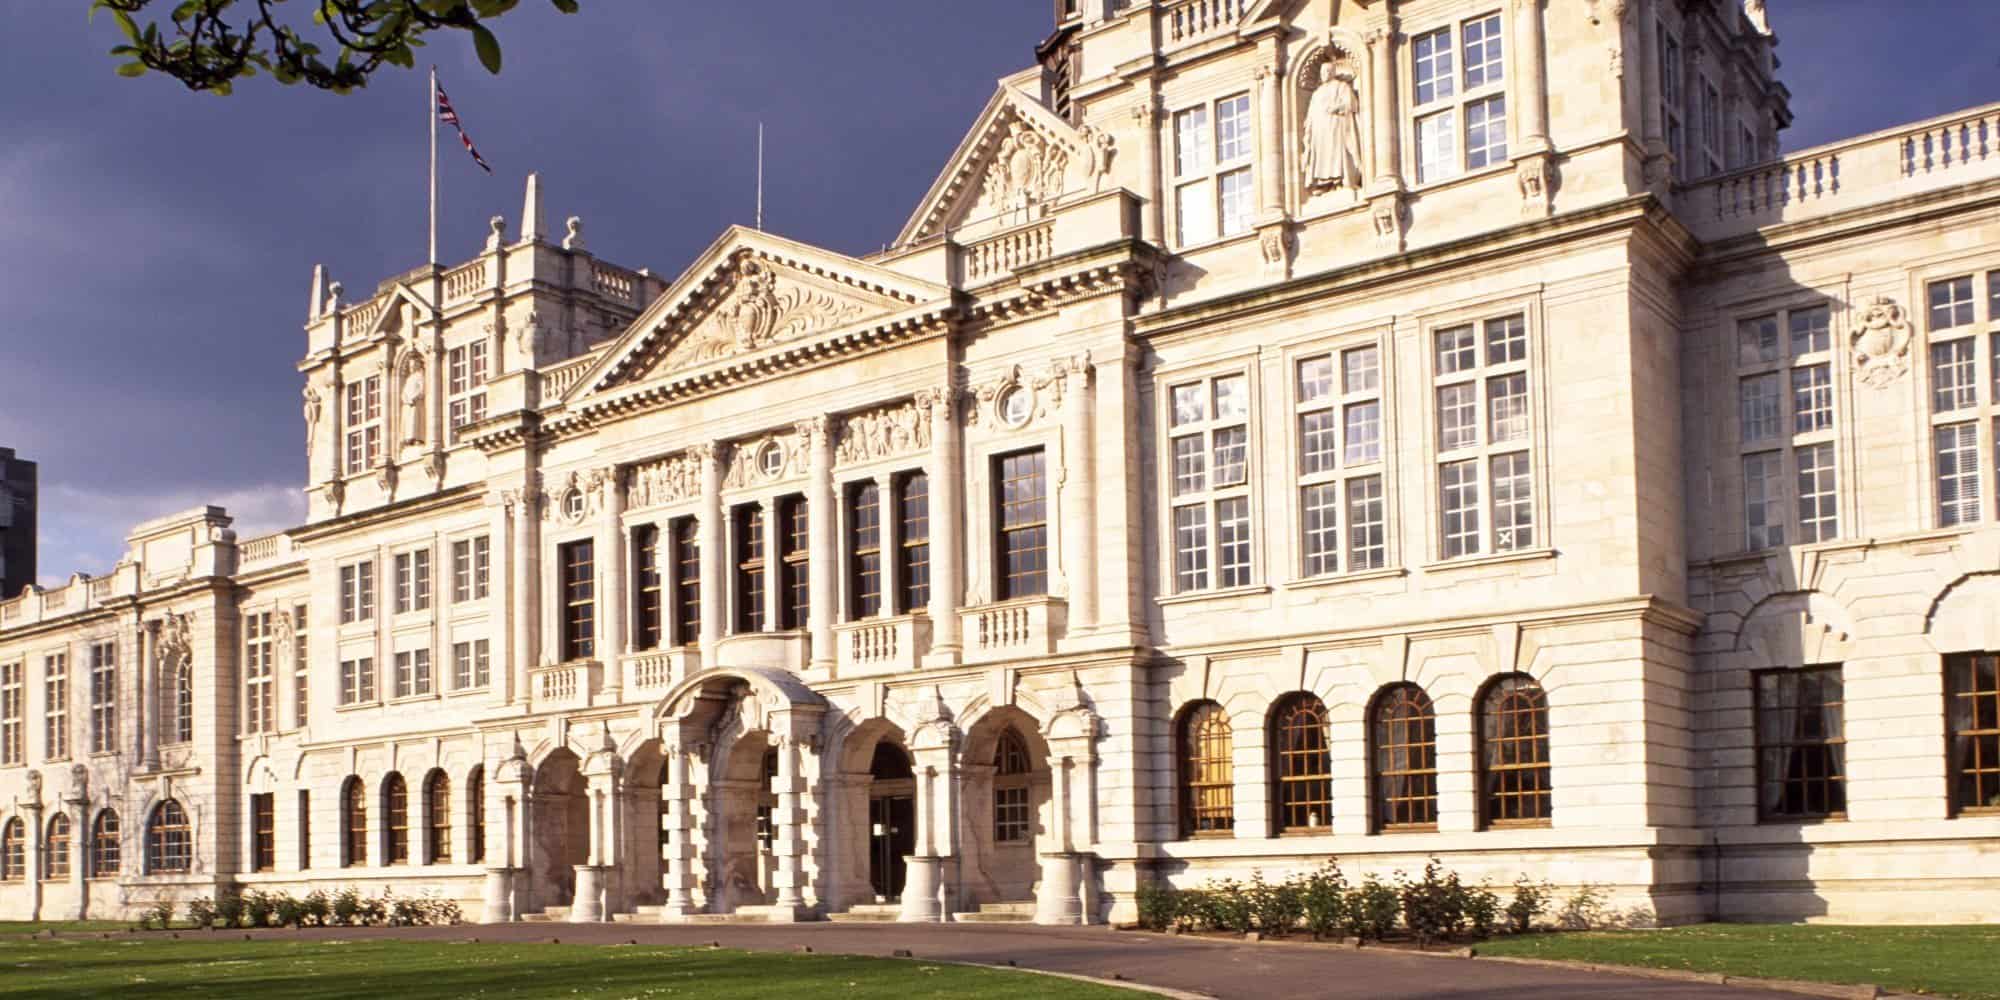 PhD Studentship for International Applicants at Cardiff University in UK, 2017